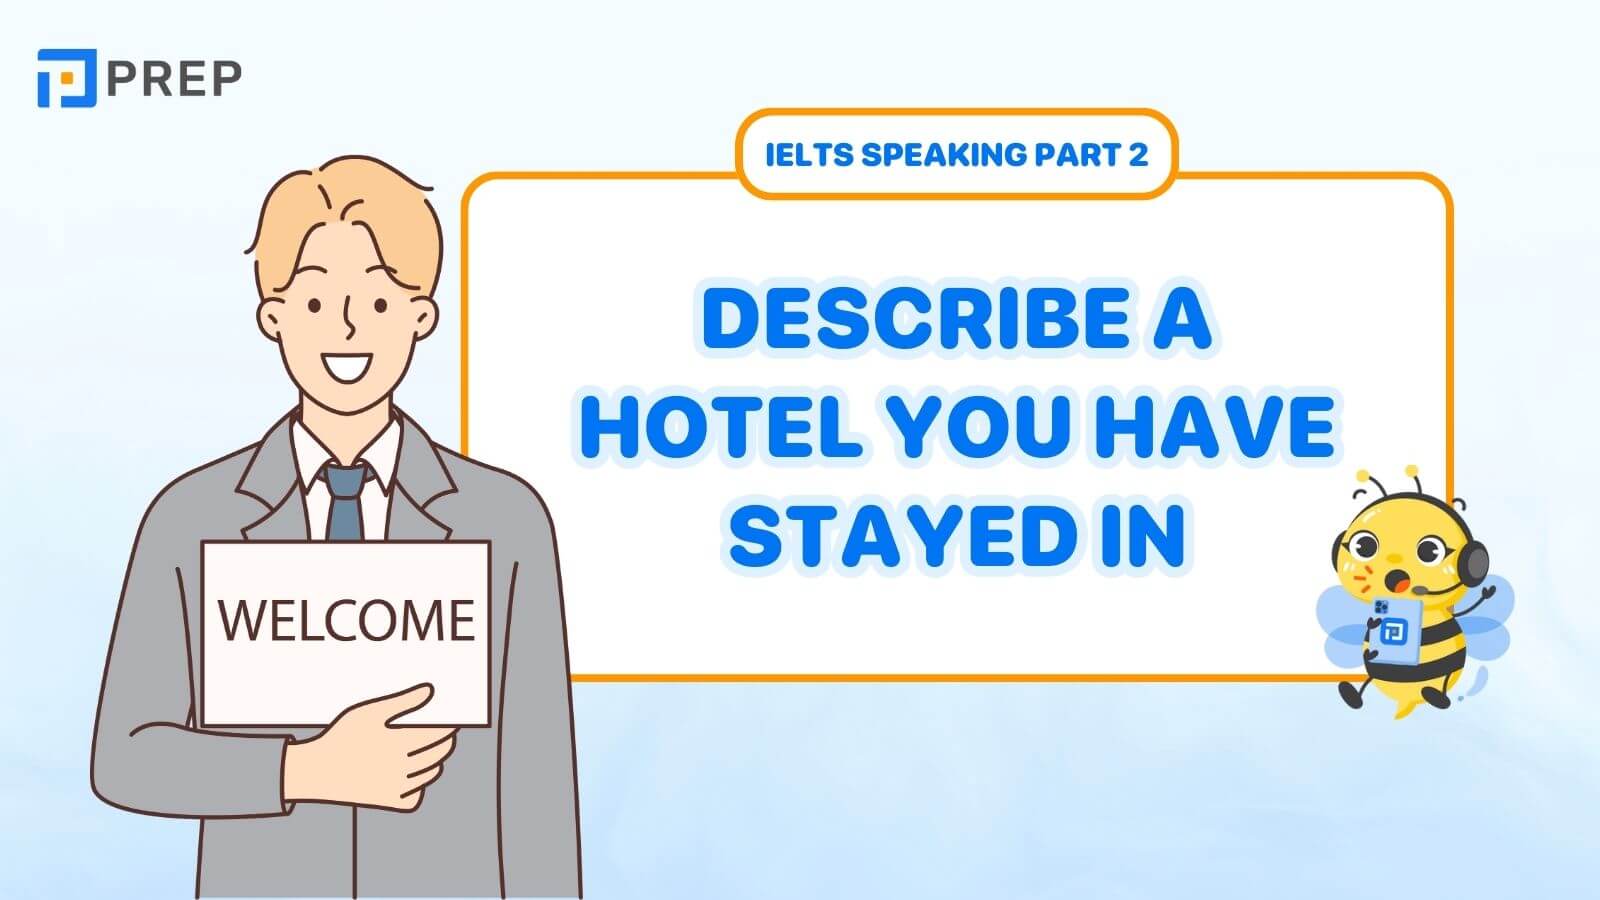 Describe a hotel you have stayed